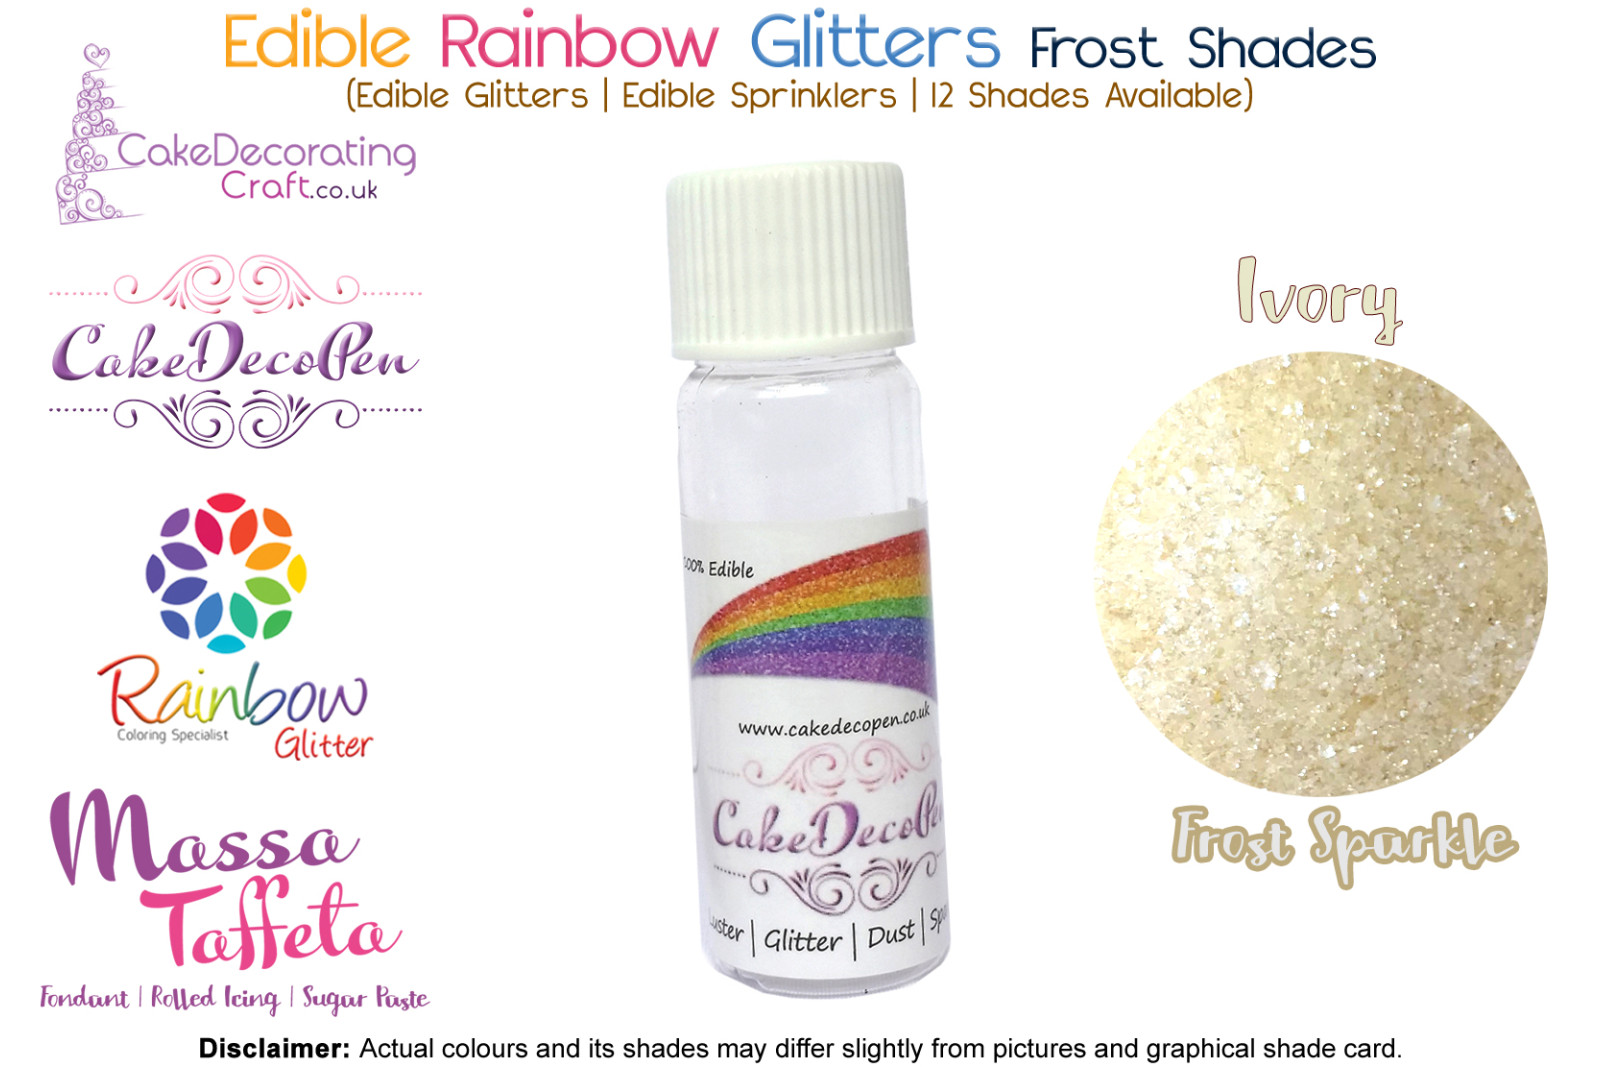 Ivory | Rainbow Glitter | Frost Shade | 100 % Edible | Cake Decorating Craft | 8 Grams